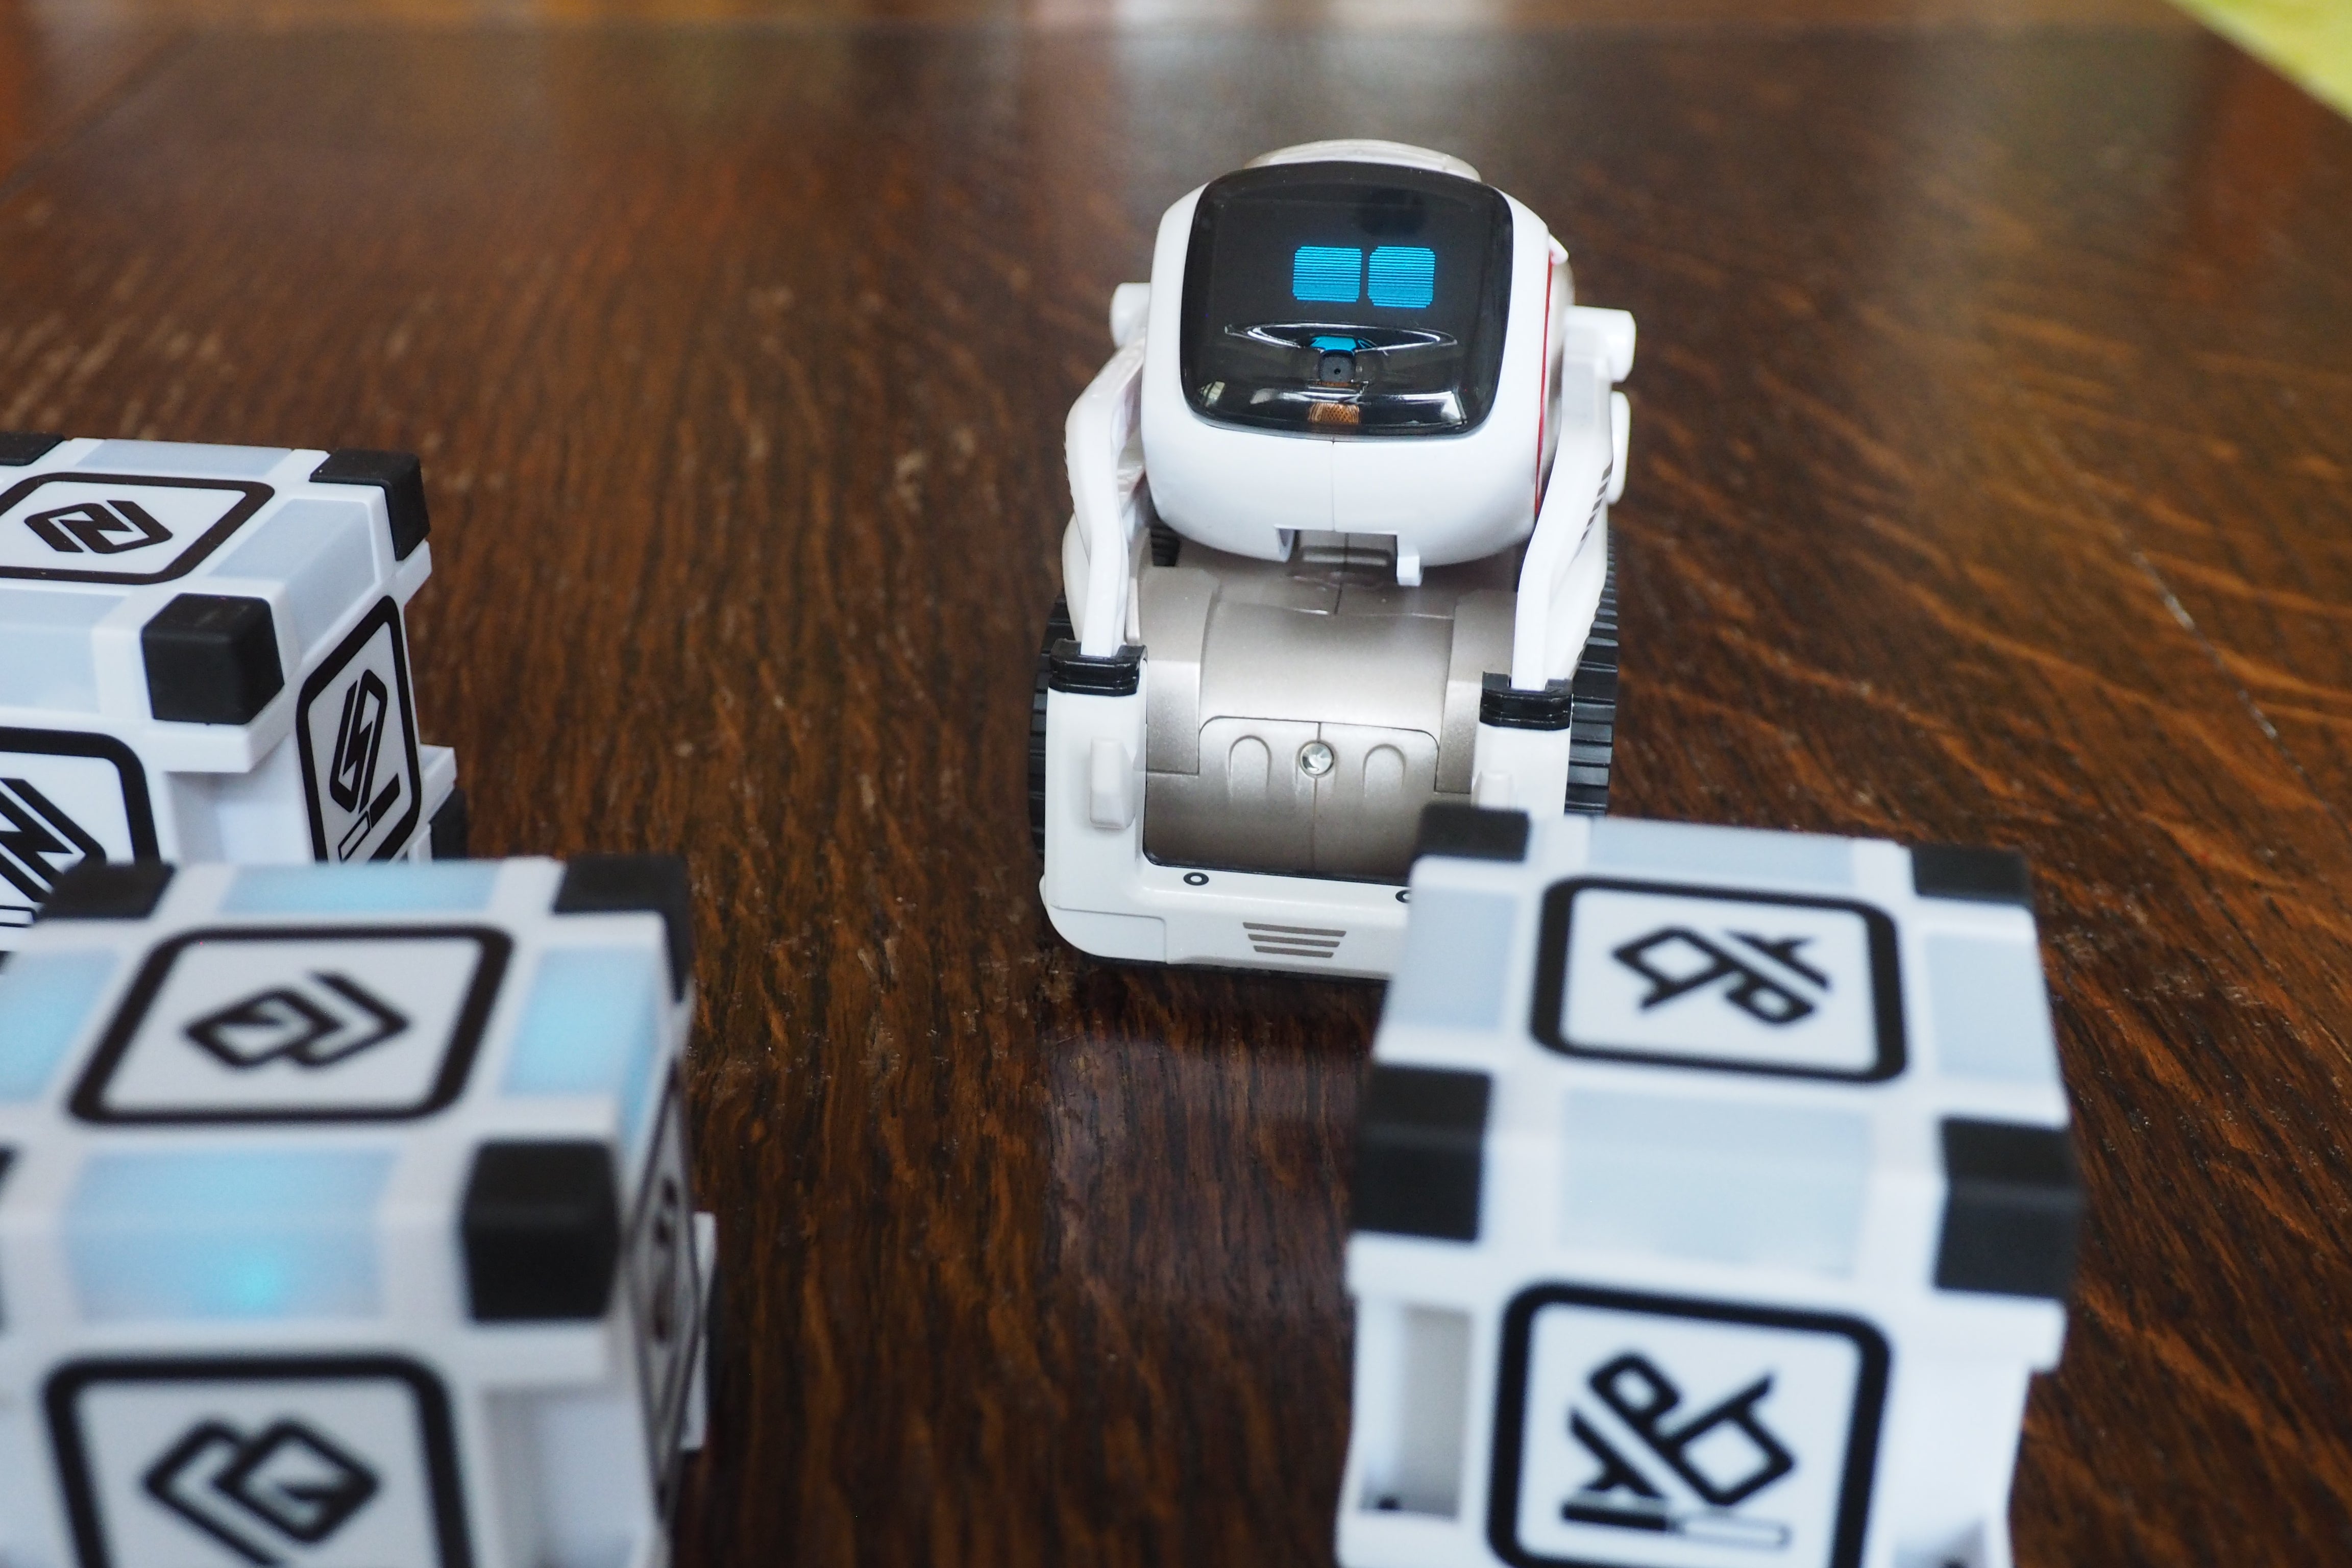 Anki Cozmo robot with interactive cubes on wooden surface.